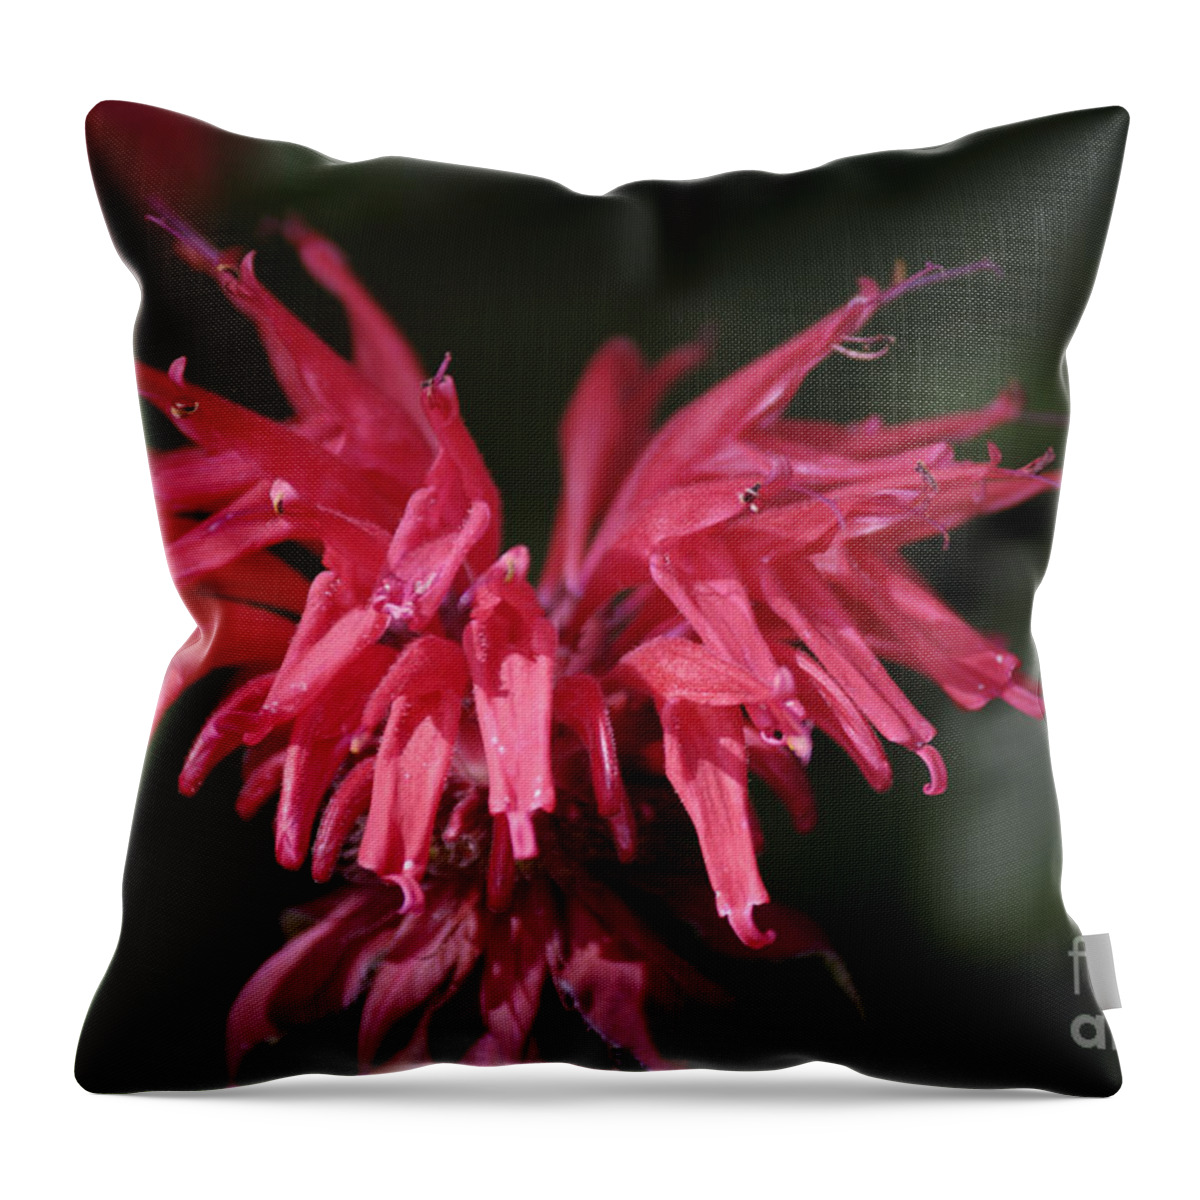 Bee Balm Throw Pillow featuring the photograph Bee Balm by Randy Bodkins